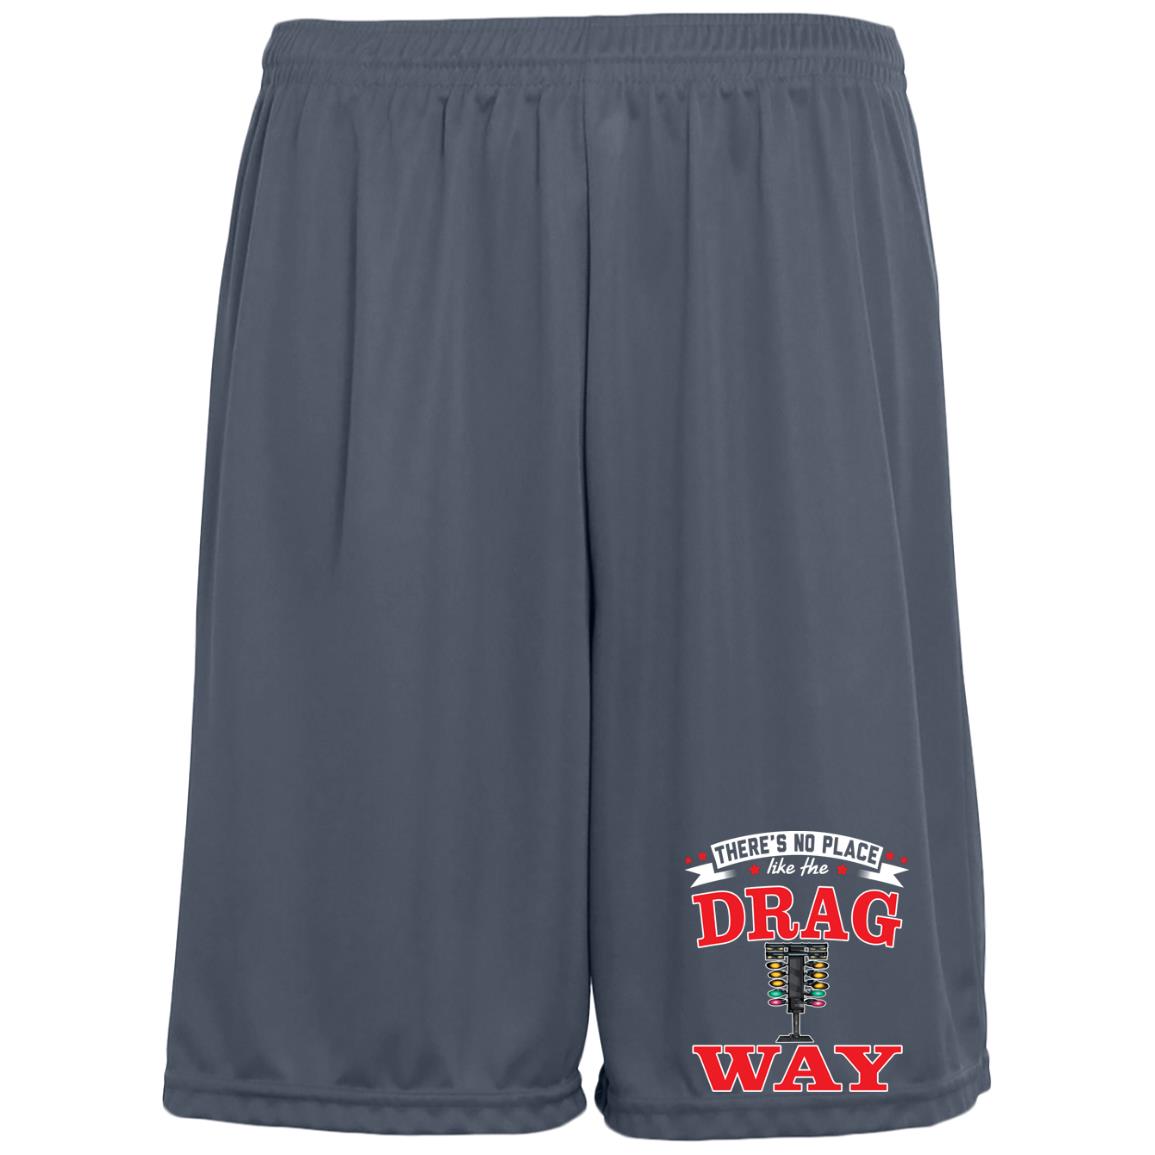 There's No Place Like The Dragway Moisture-Wicking Pocketed 9 inch Inseam Training Shorts